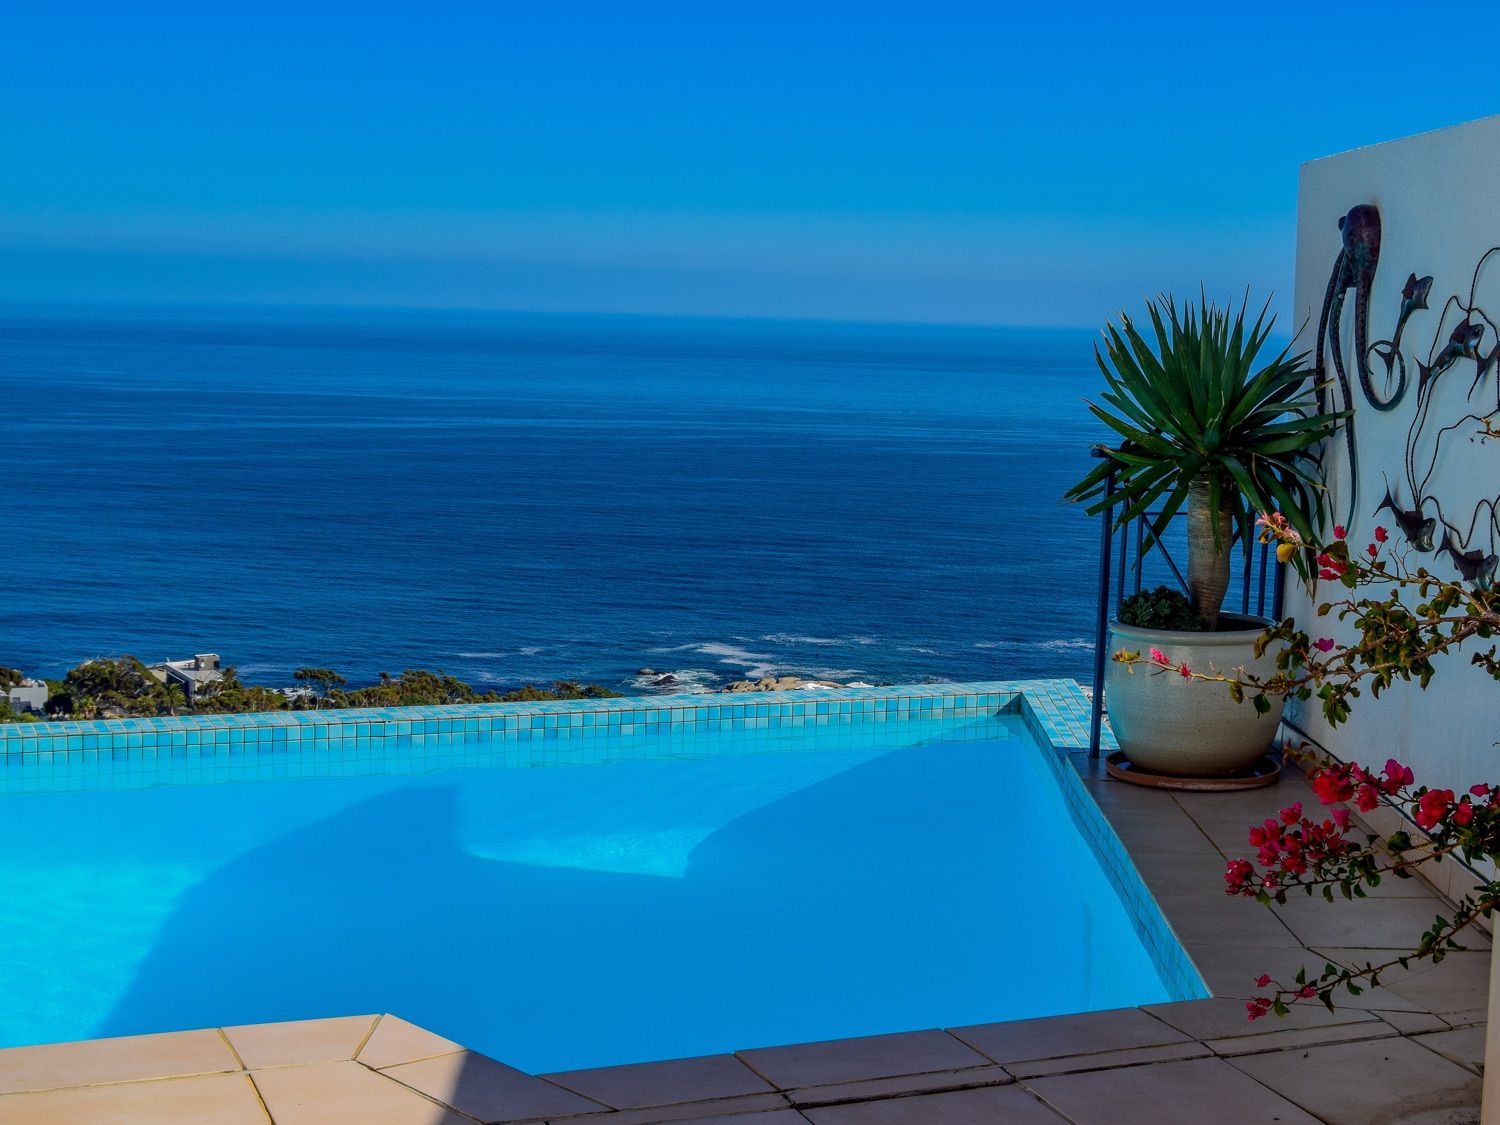 Photo 3 of Oceanscape Camps Bay accommodation in Camps Bay, Cape Town with 4 bedrooms and 4 bathrooms